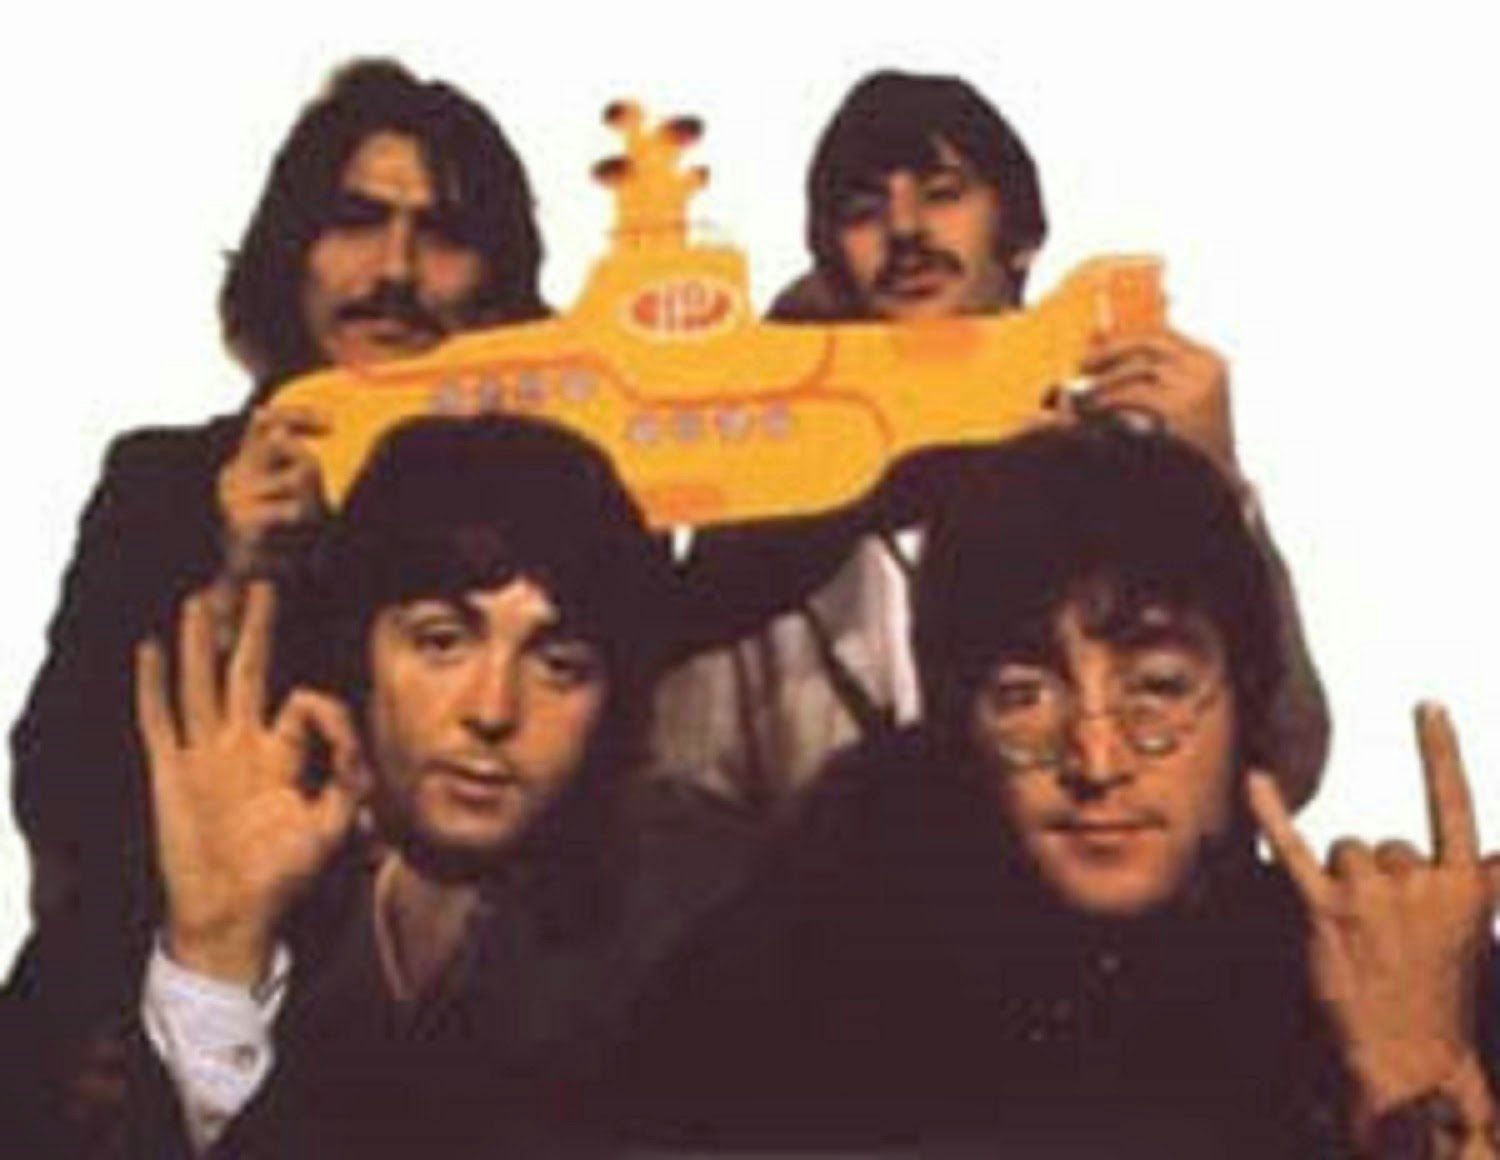 THE BEATLES - THE 666 SIGN AND THE DEVIL WORSHIP SIGN